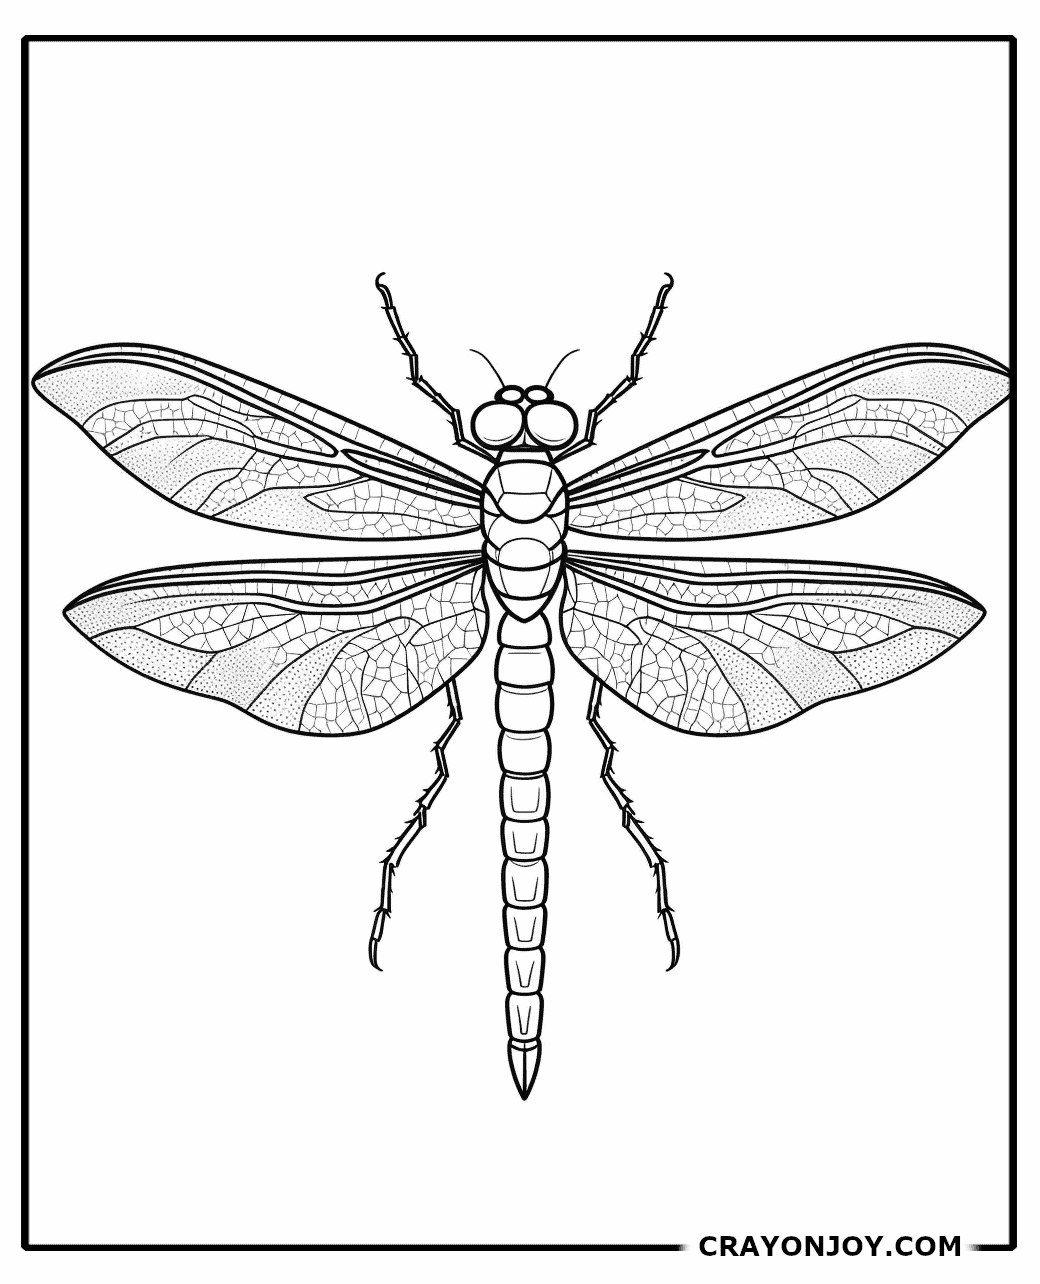 Dragonfly Coloring Pages: Free Printable Sheets for Kids and Adults